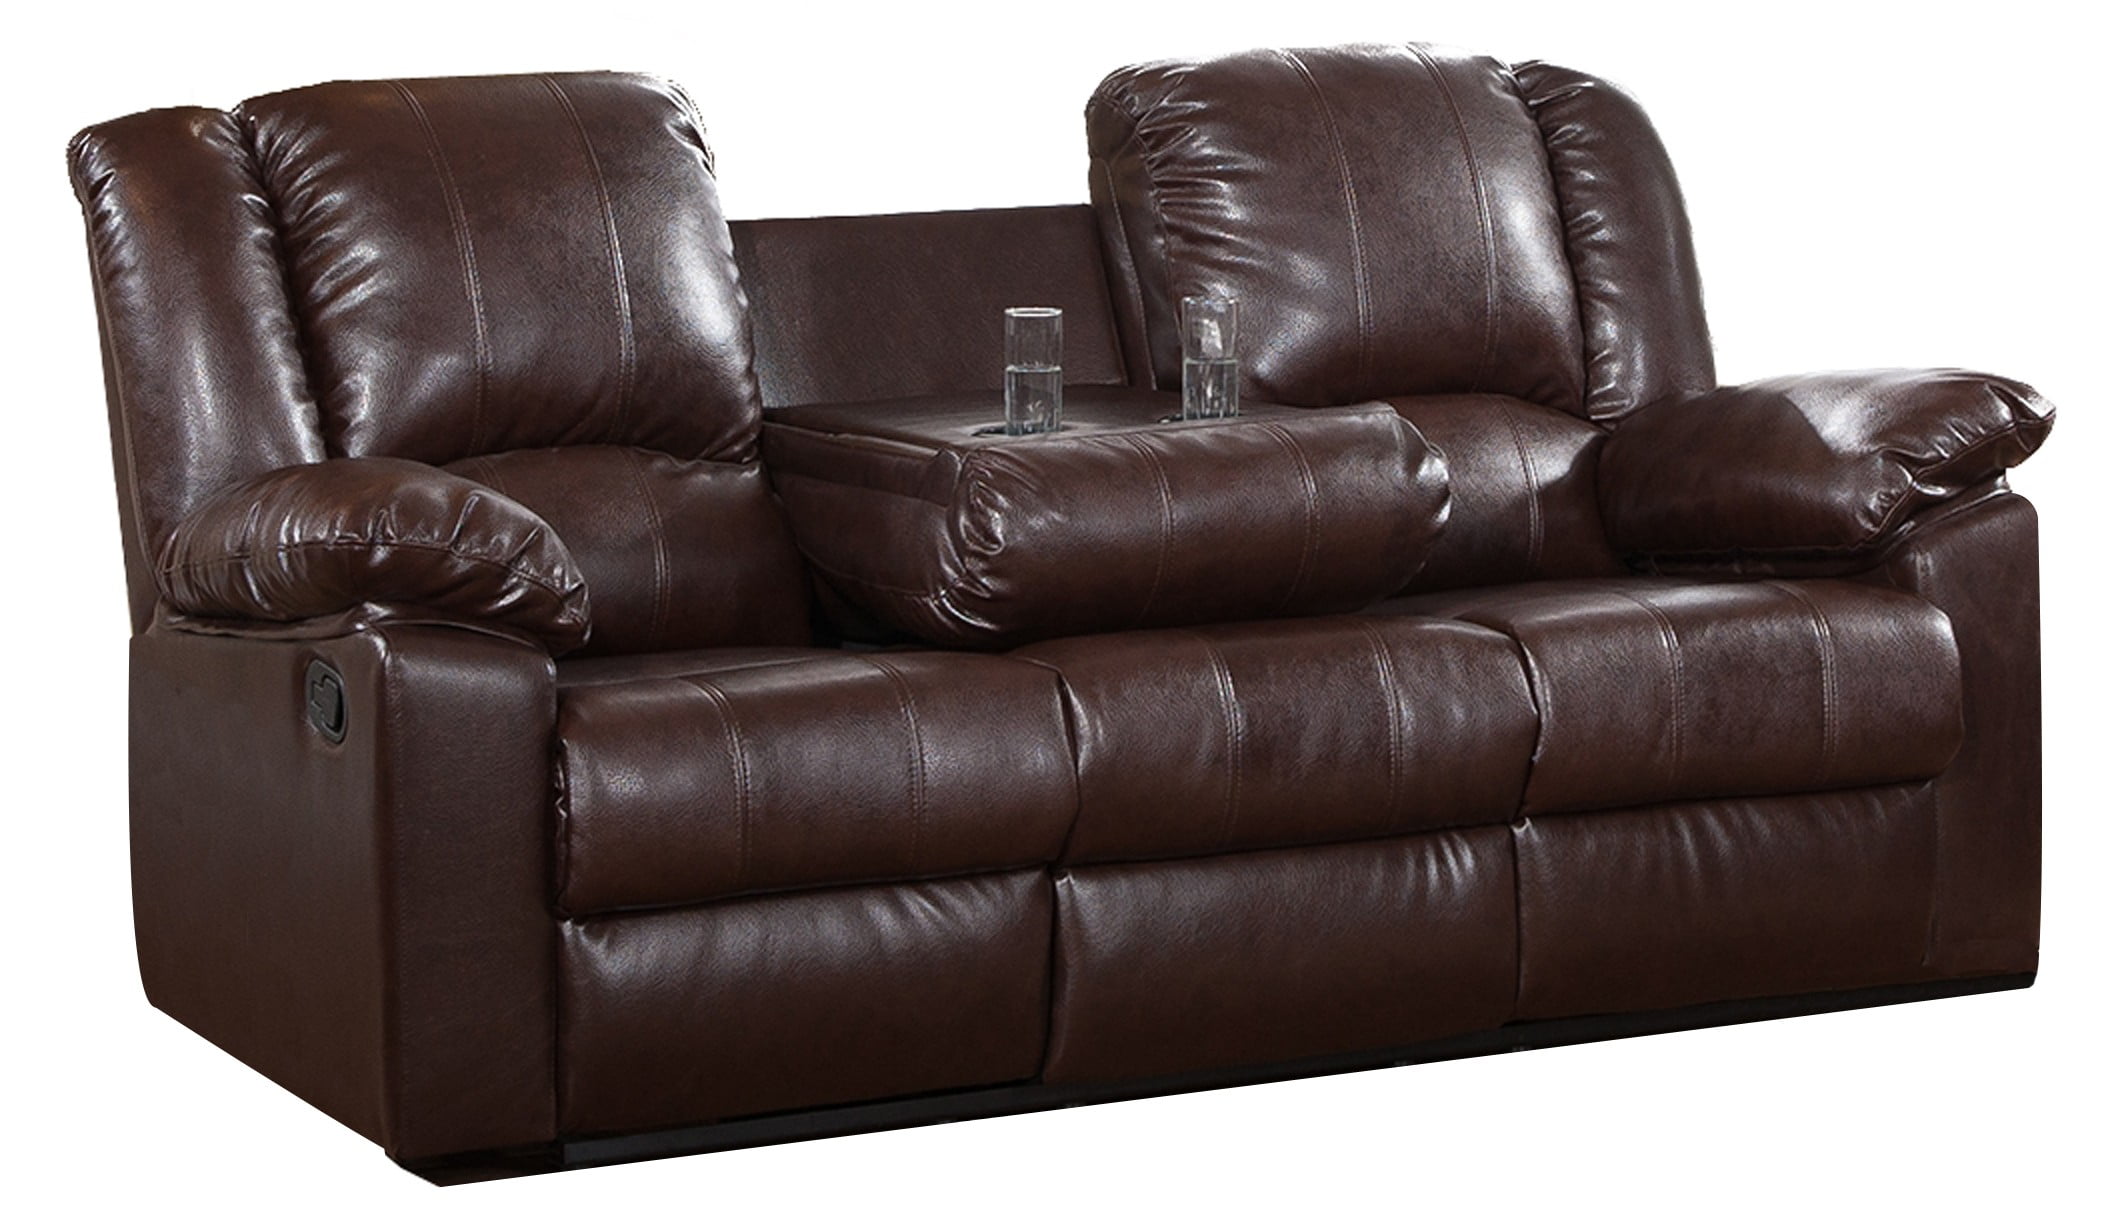 hodedah sofa bed with cup holders